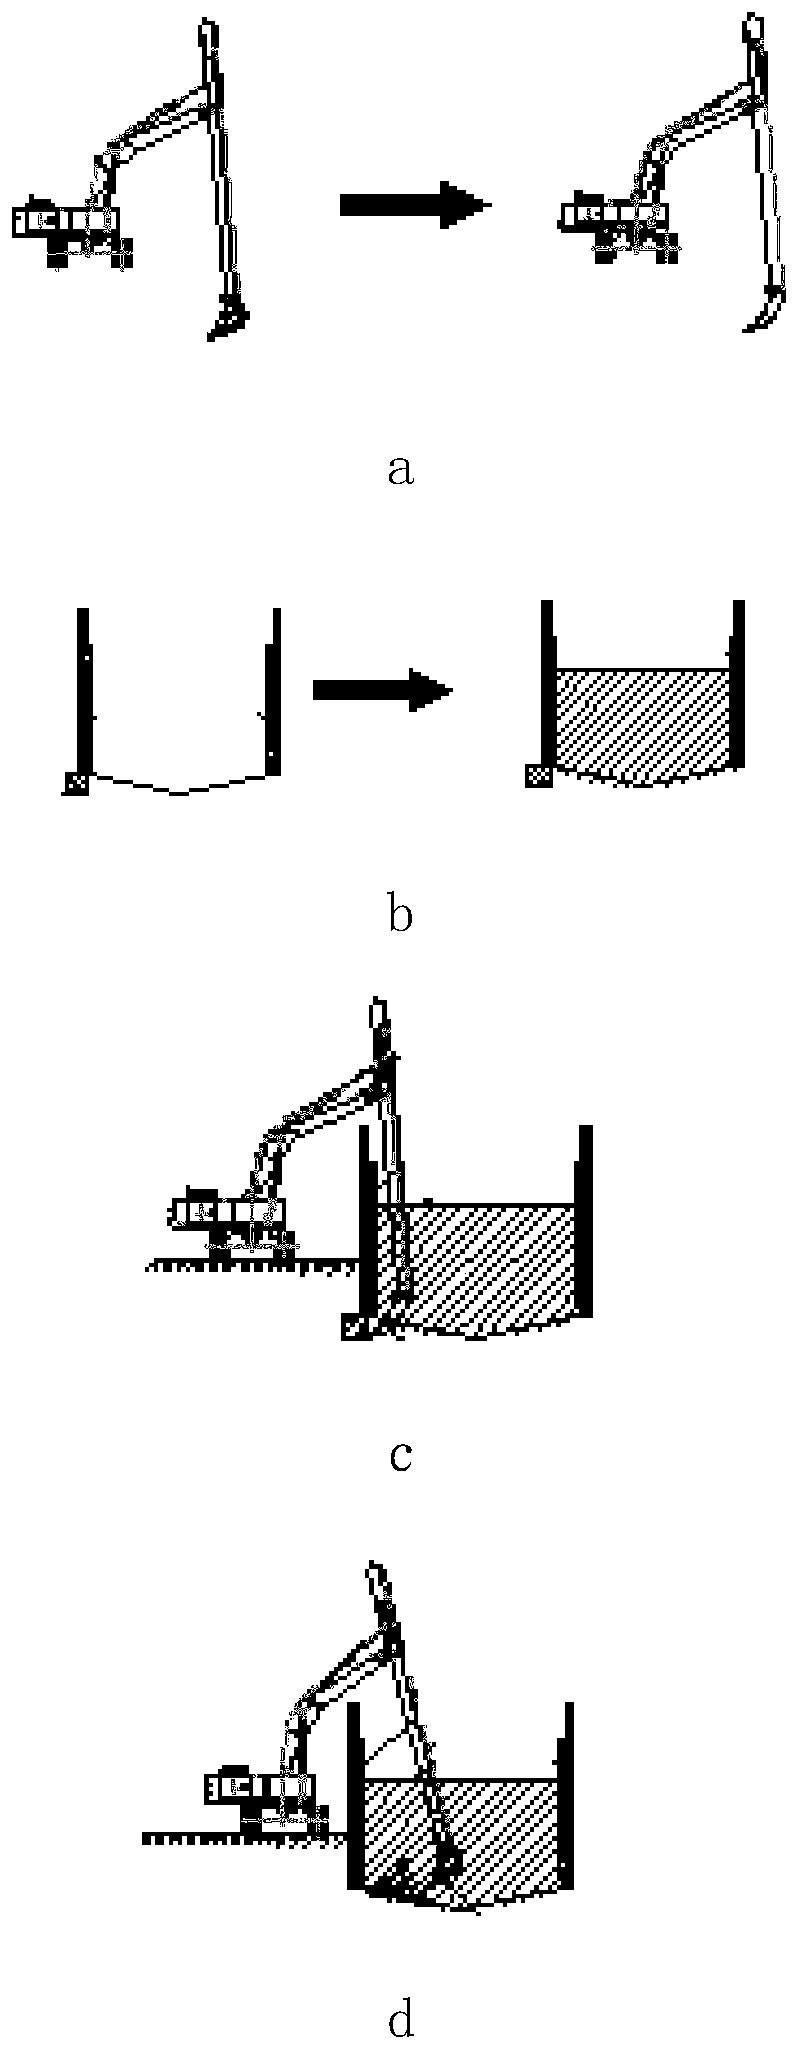 Method for efficiently breaking open caisson sinking obstacles